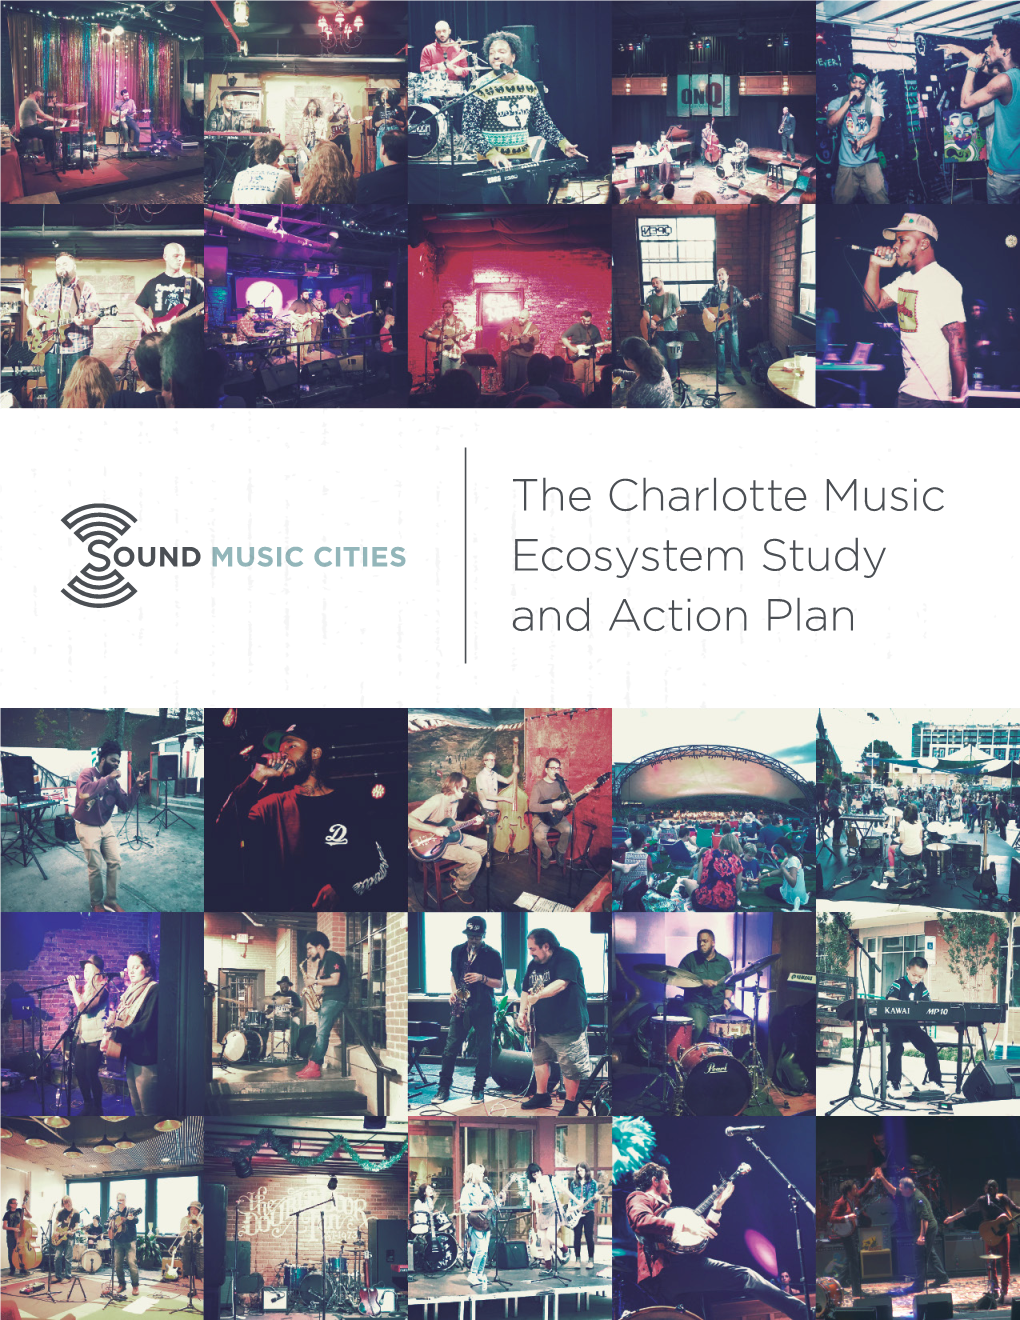 The Charlotte Music Ecosystem Study and Action Plan